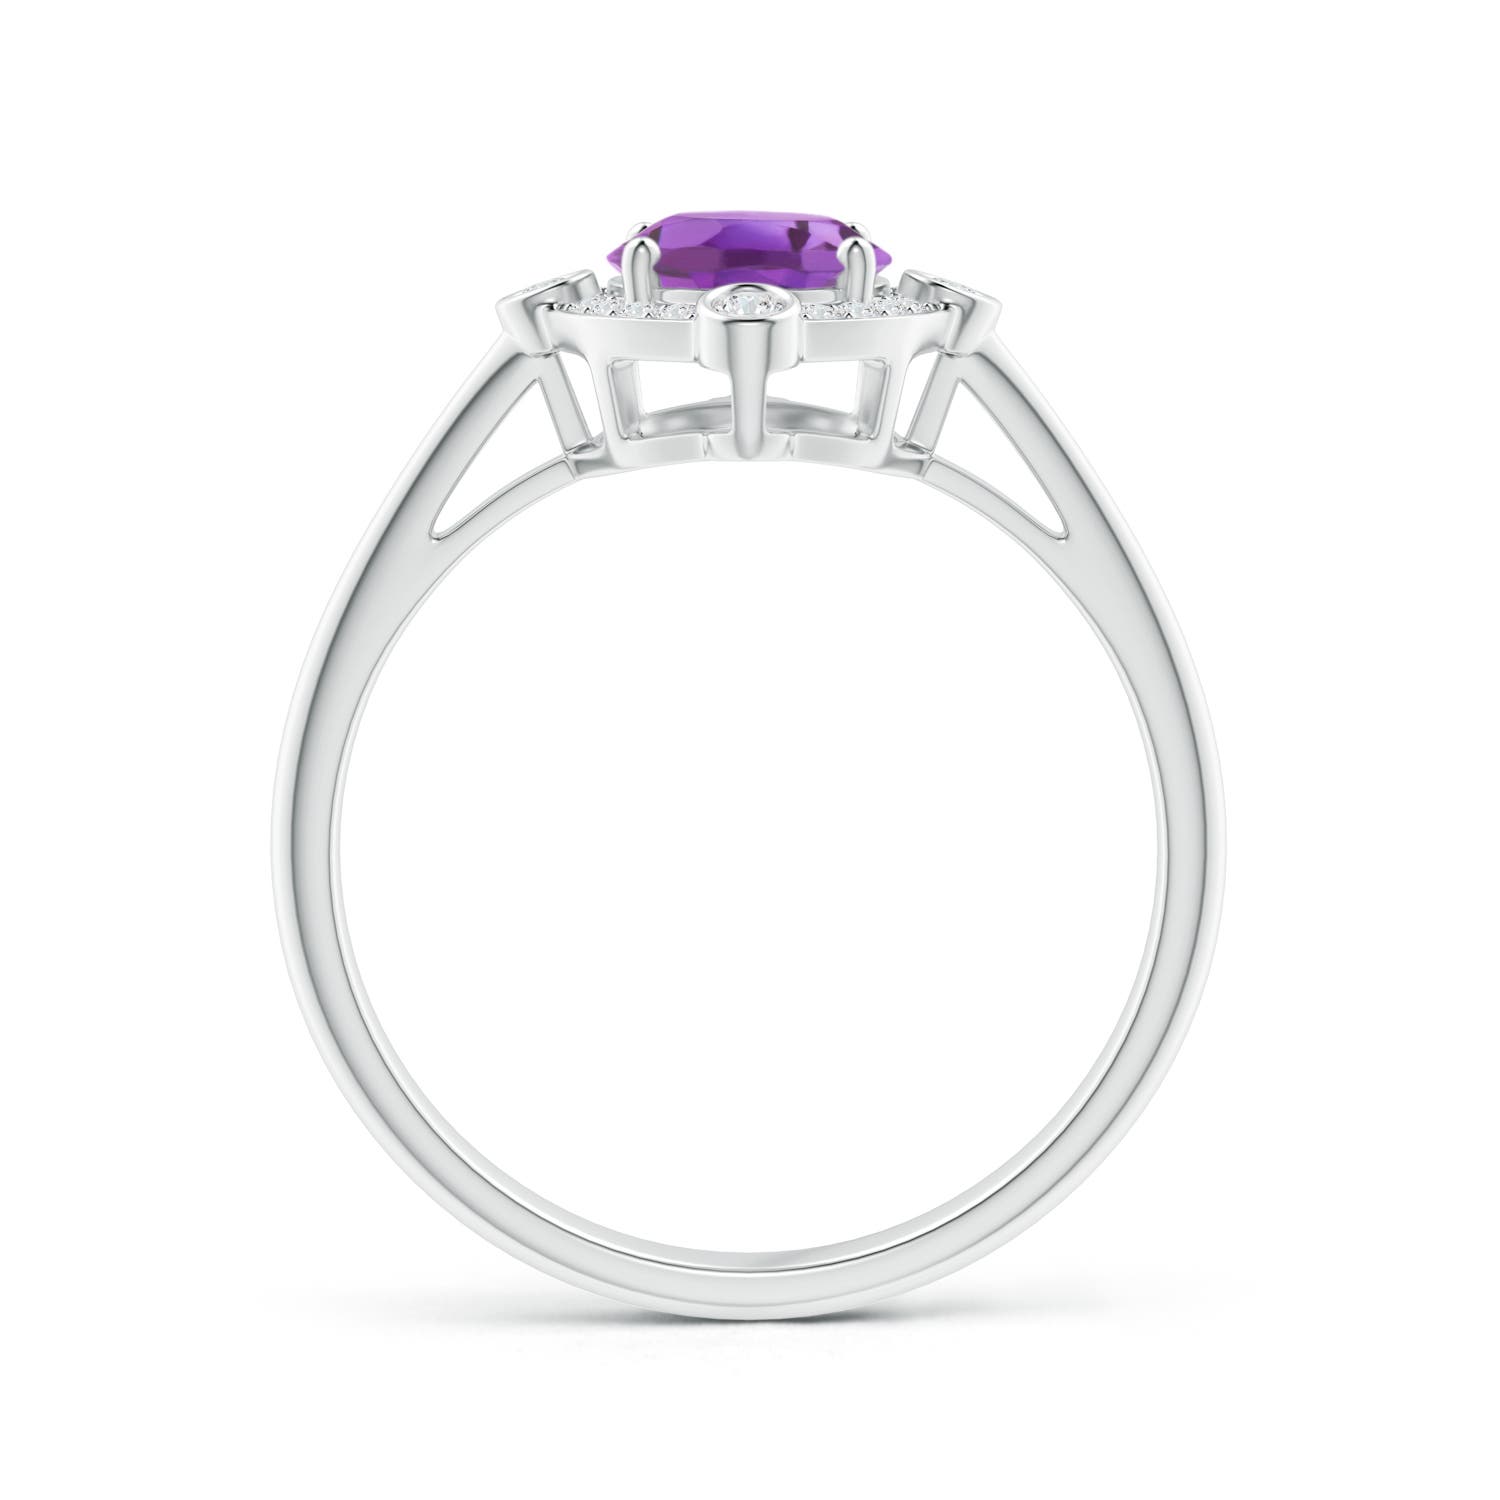 A - Amethyst / 1.29 CT / 14 KT White Gold